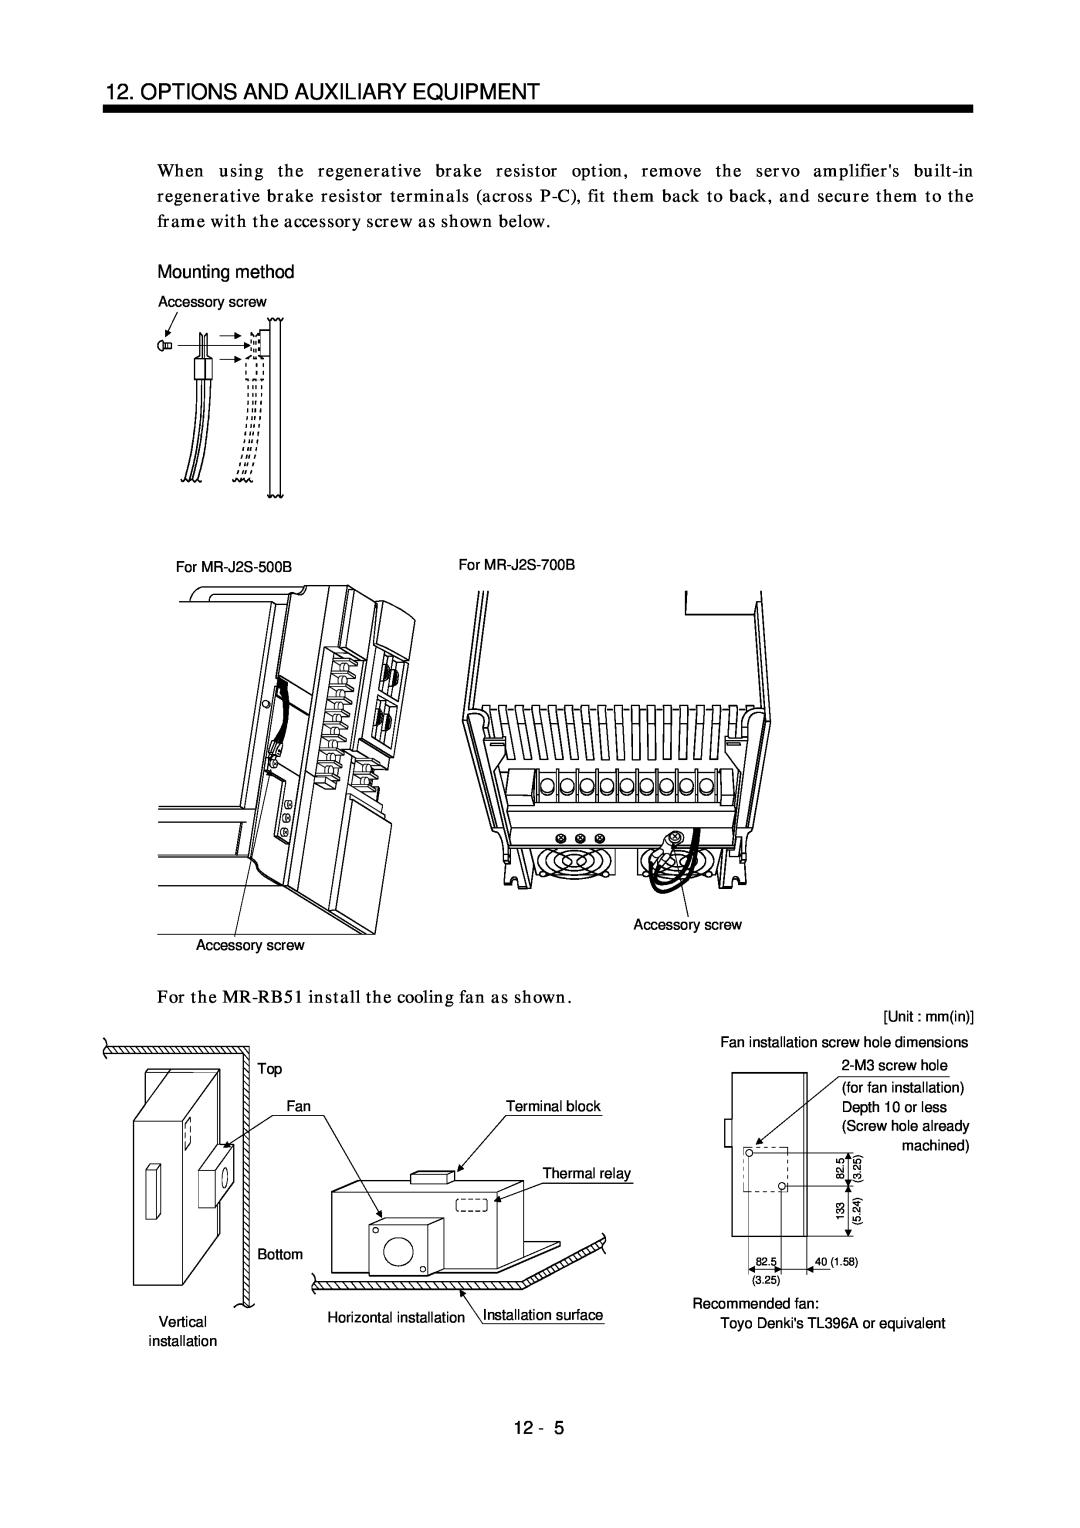 Bose MR-J2S- B instruction manual Mounting method, Options And Auxiliary Equipment, 12 